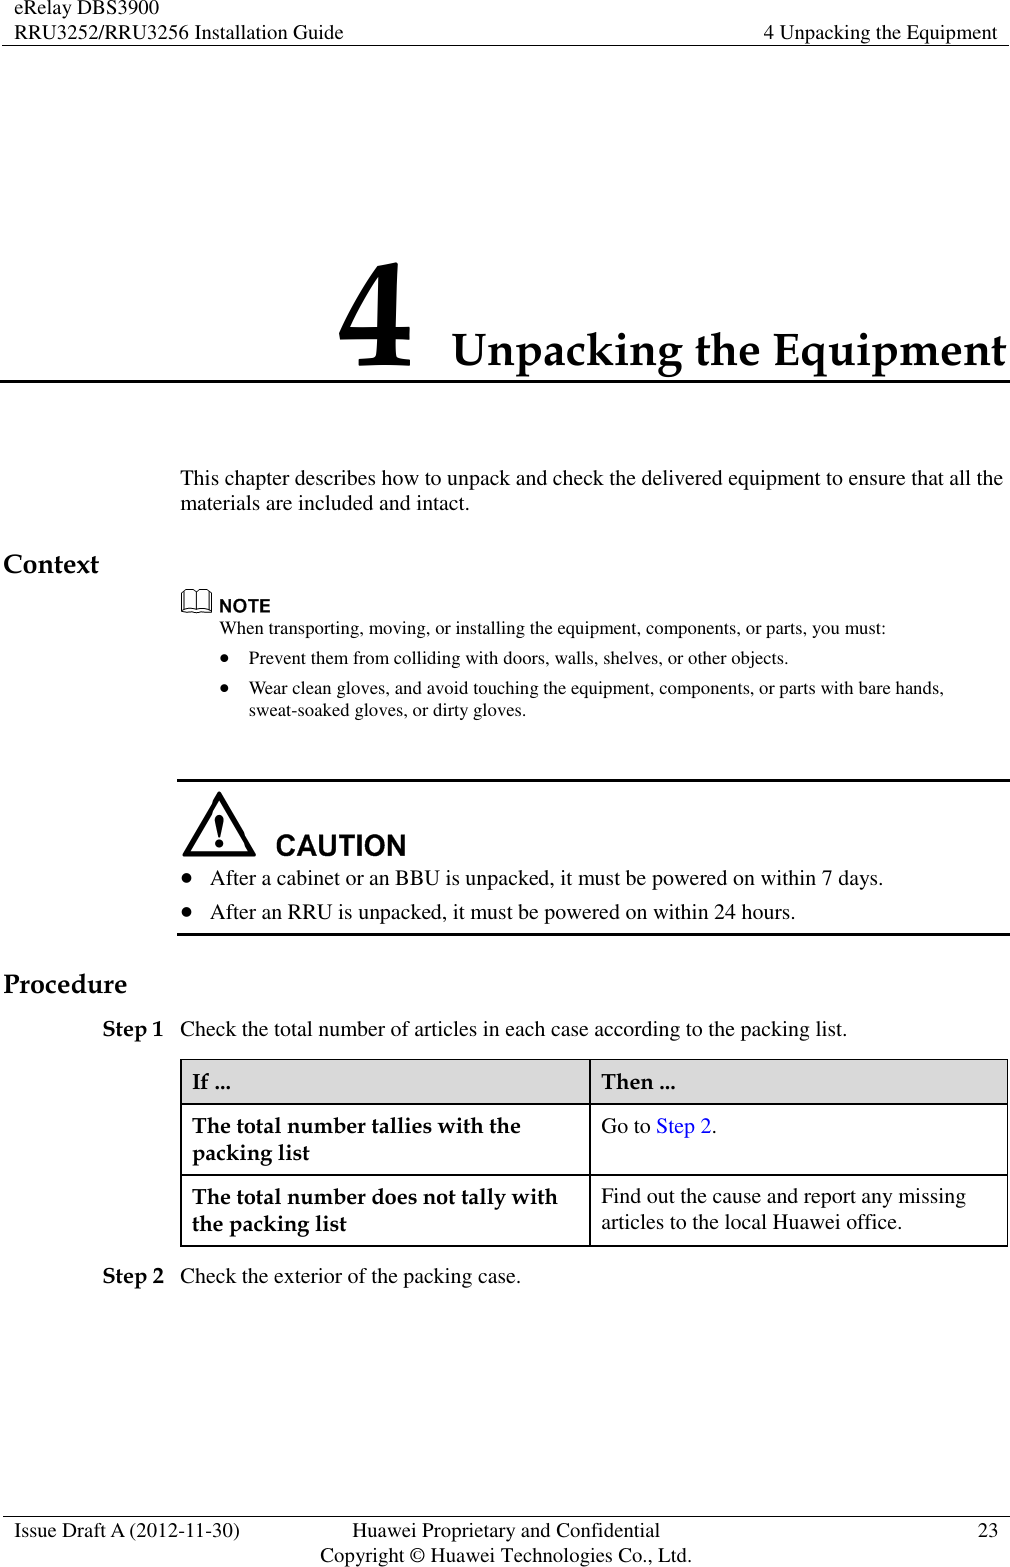 eRelay DBS3900 RRU3252/RRU3256 Installation Guide 4 Unpacking the Equipment  Issue Draft A (2012-11-30) Huawei Proprietary and Confidential                                     Copyright © Huawei Technologies Co., Ltd. 23  4 Unpacking the Equipment This chapter describes how to unpack and check the delivered equipment to ensure that all the materials are included and intact. Context  When transporting, moving, or installing the equipment, components, or parts, you must:  Prevent them from colliding with doors, walls, shelves, or other objects.  Wear clean gloves, and avoid touching the equipment, components, or parts with bare hands, sweat-soaked gloves, or dirty gloves.    After a cabinet or an BBU is unpacked, it must be powered on within 7 days.    After an RRU is unpacked, it must be powered on within 24 hours.   Procedure Step 1 Check the total number of articles in each case according to the packing list. If ... Then ... The total number tallies with the packing list Go to Step 2. The total number does not tally with the packing list Find out the cause and report any missing articles to the local Huawei office. Step 2 Check the exterior of the packing case. 